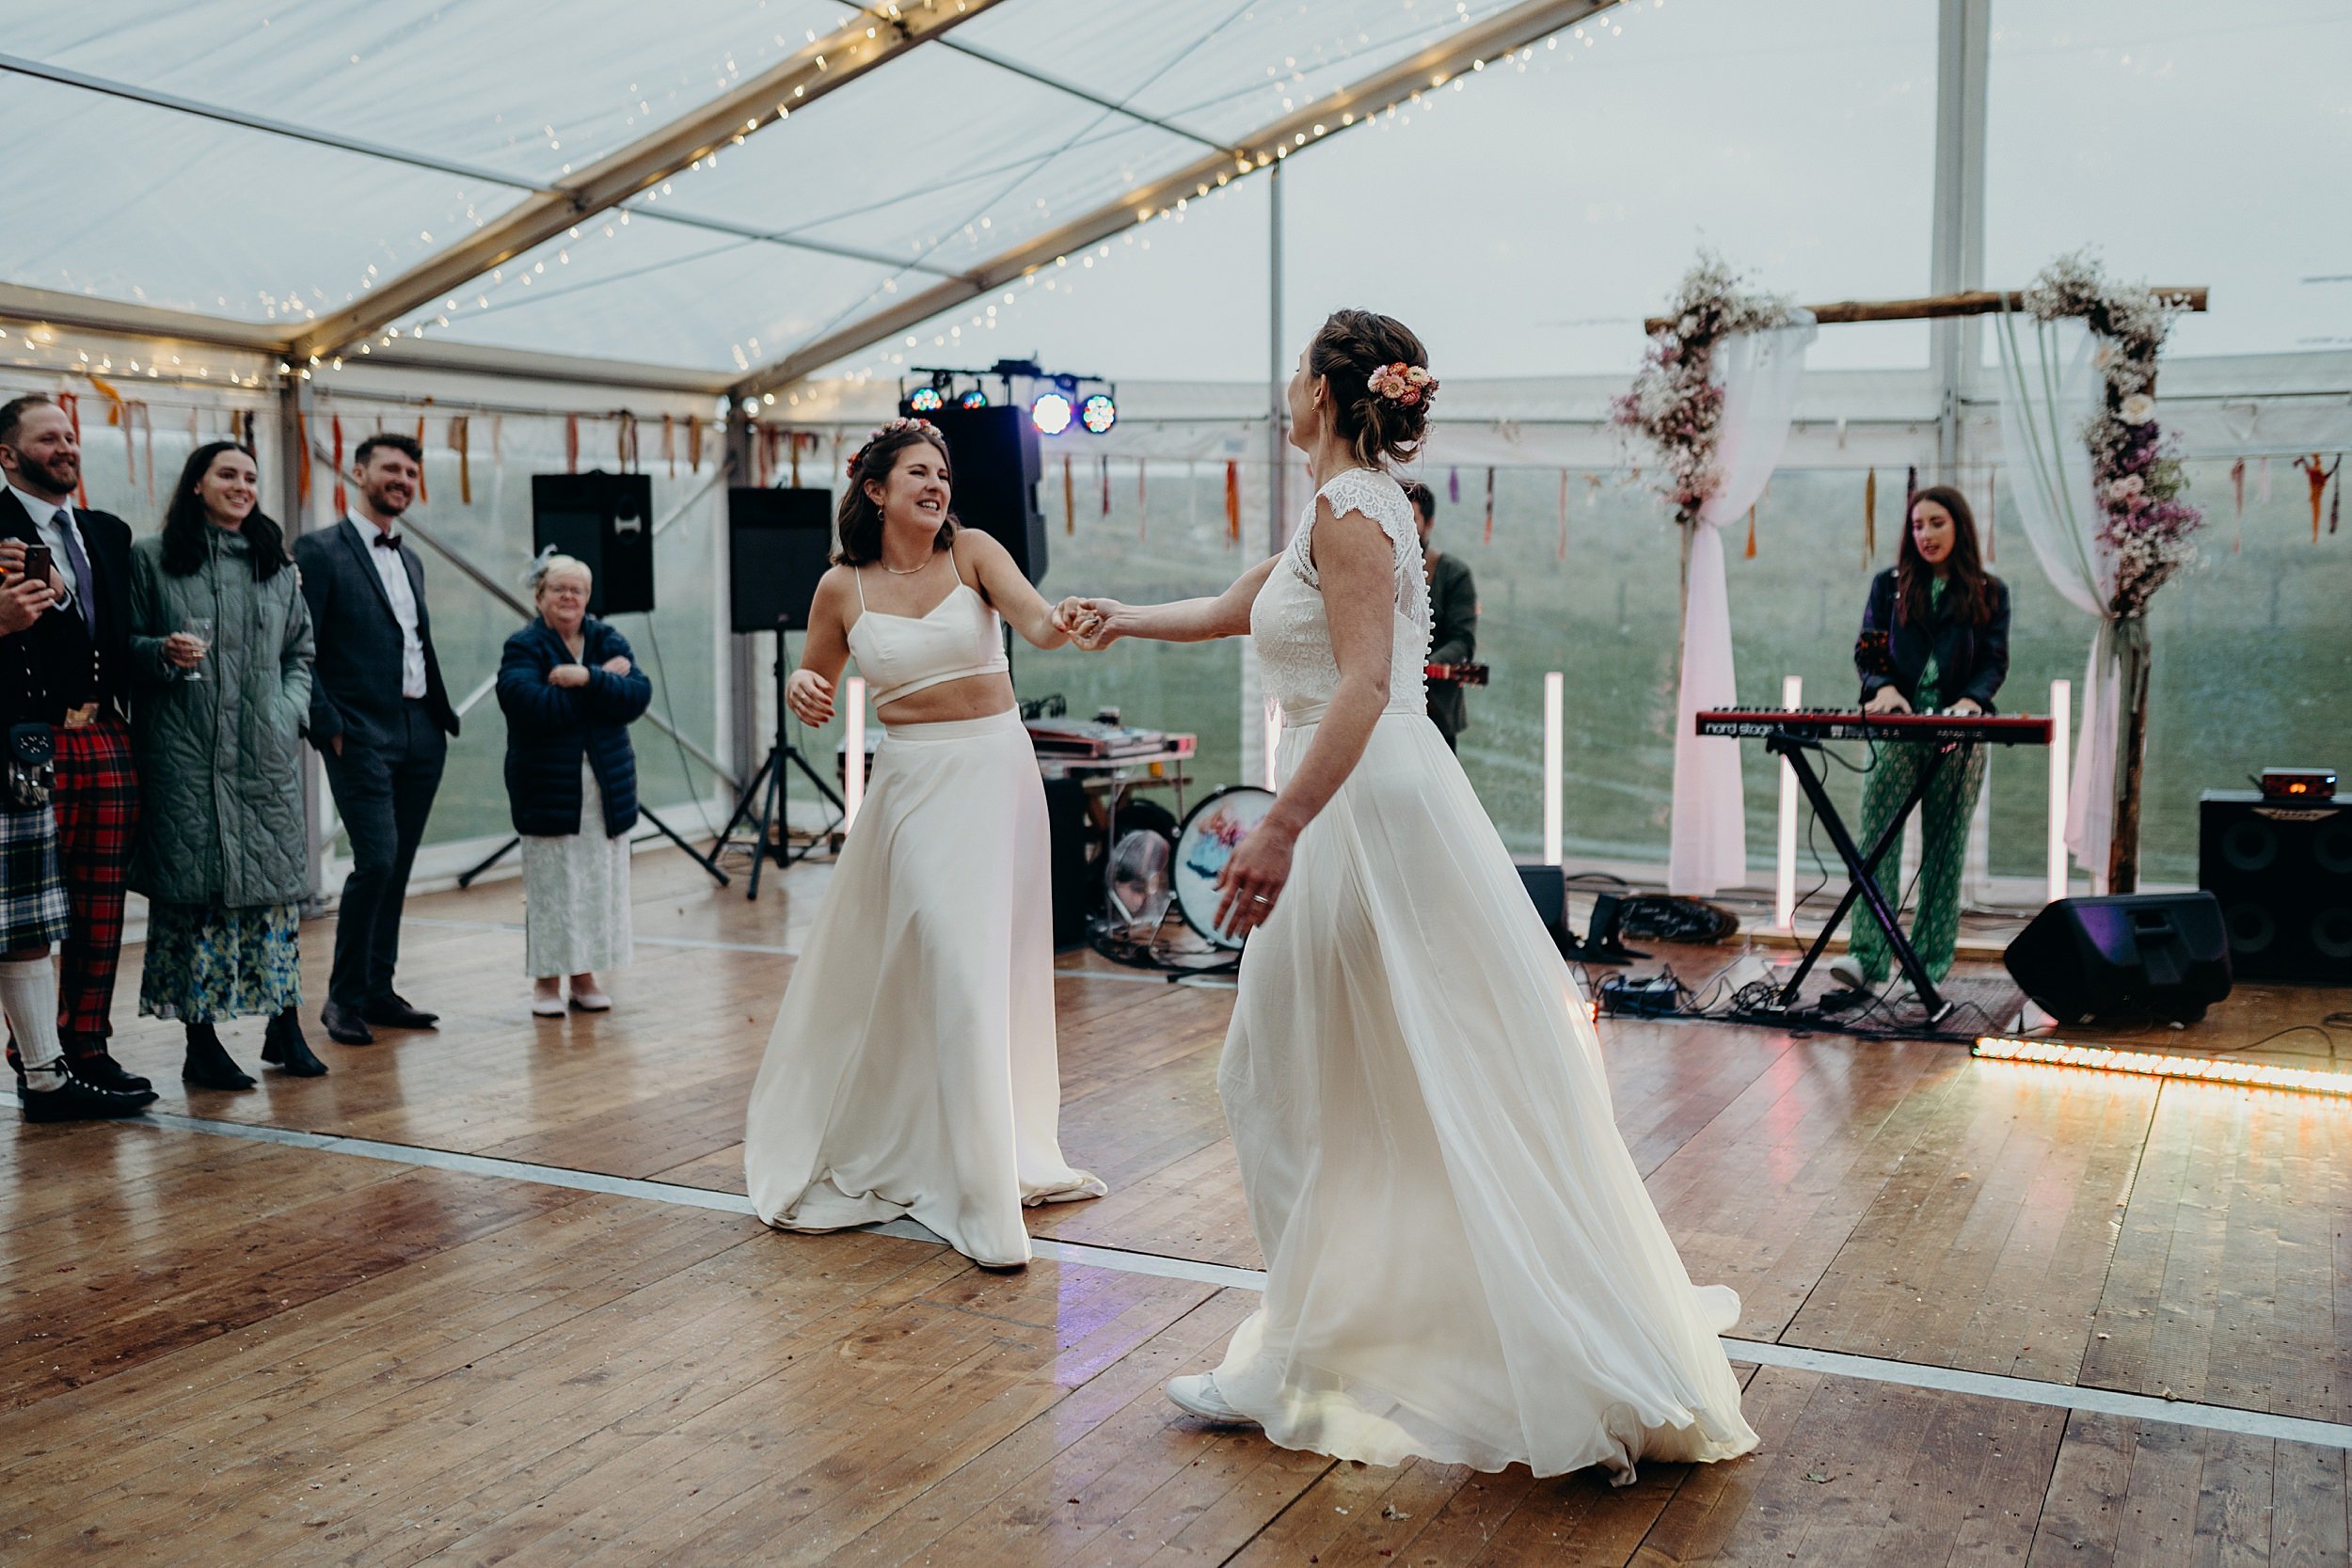 the two brides dance their first dance in a white marquee at harvest moon wedding venue in dunbar scotland